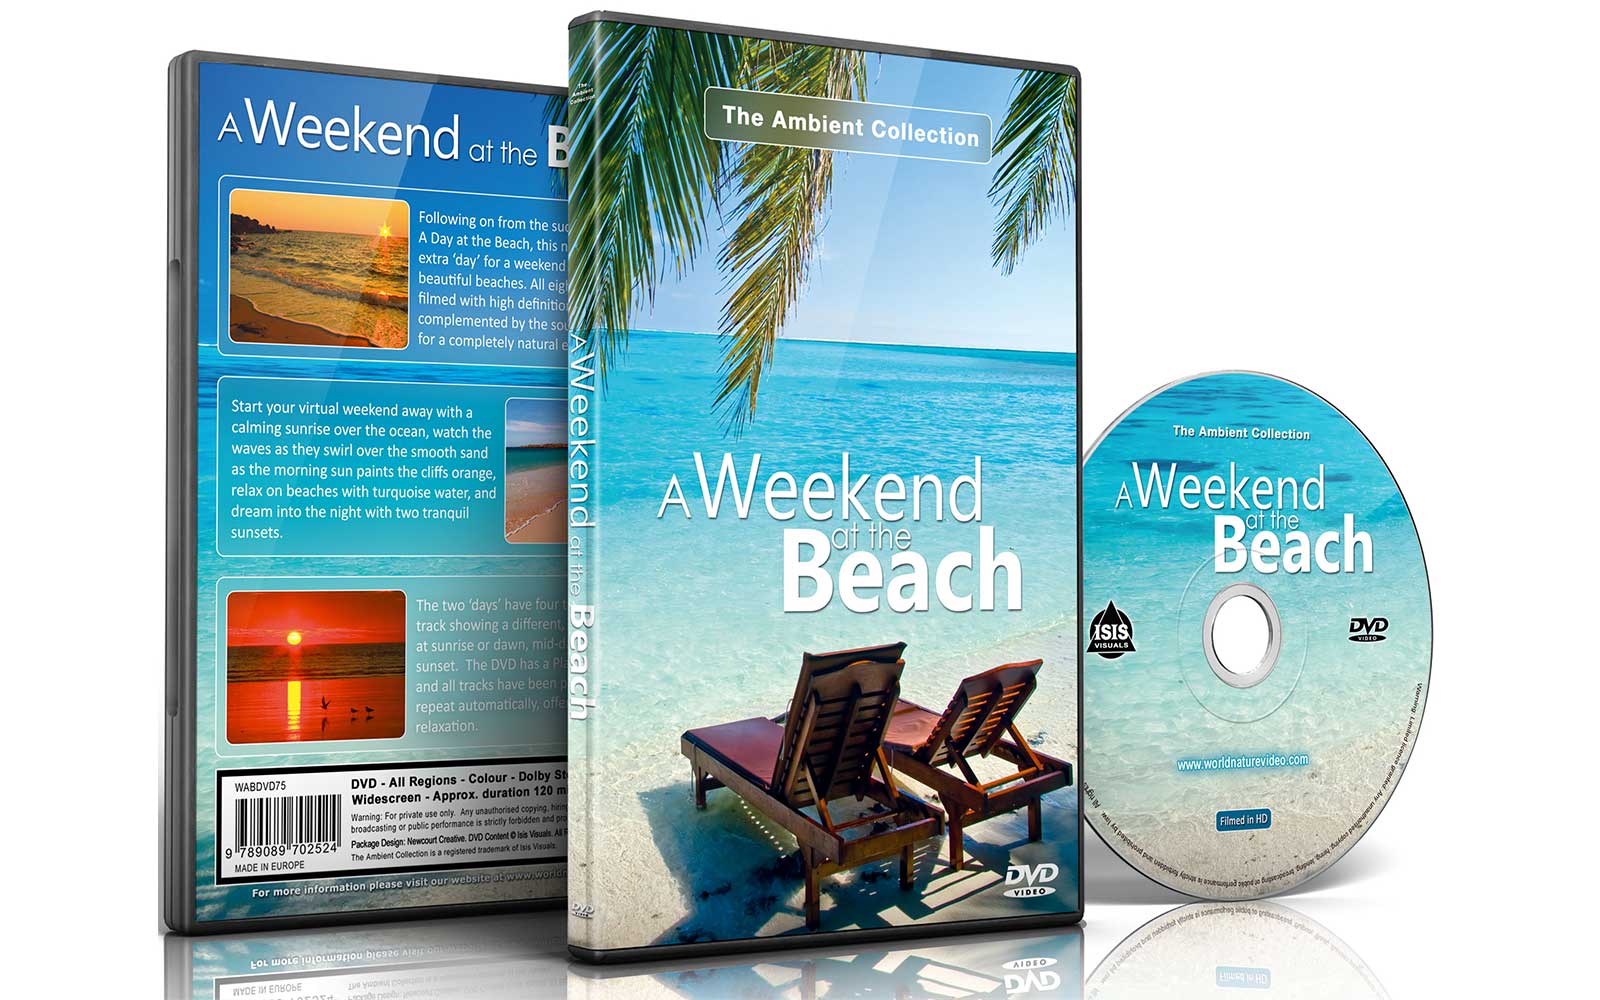 A Weekend At The Beach – The Ambient Collections Dvds